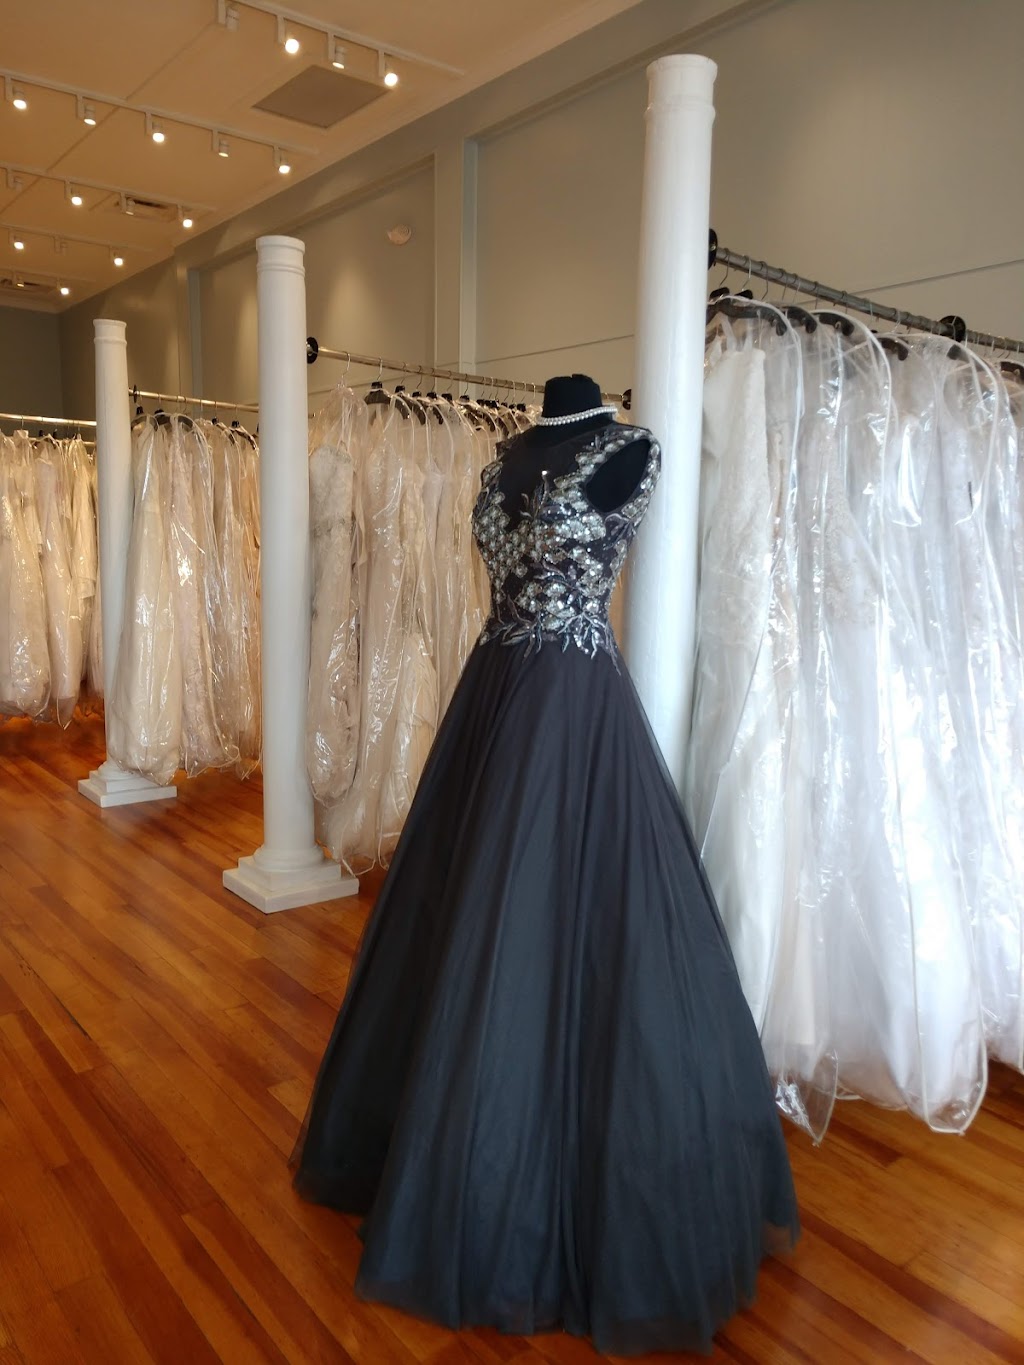 Going to the Chapel dress shop | 555 Enfield St, Enfield, CT 06082 | Phone: (860) 265-2011